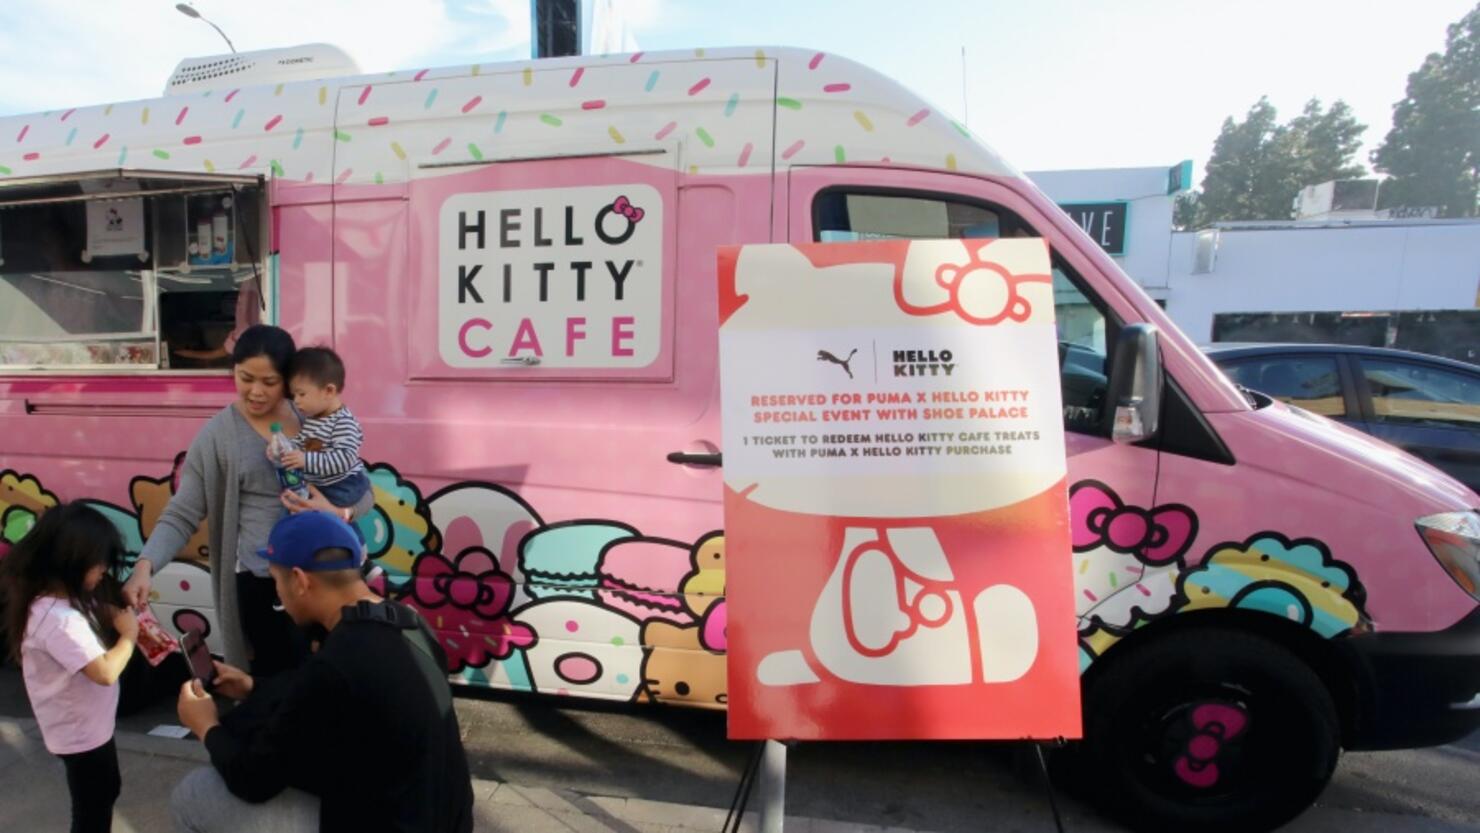 Hello Kitty Cafe Trucks Are On Tour Across The US & Here's What You'll Find  On The Menu - Narcity